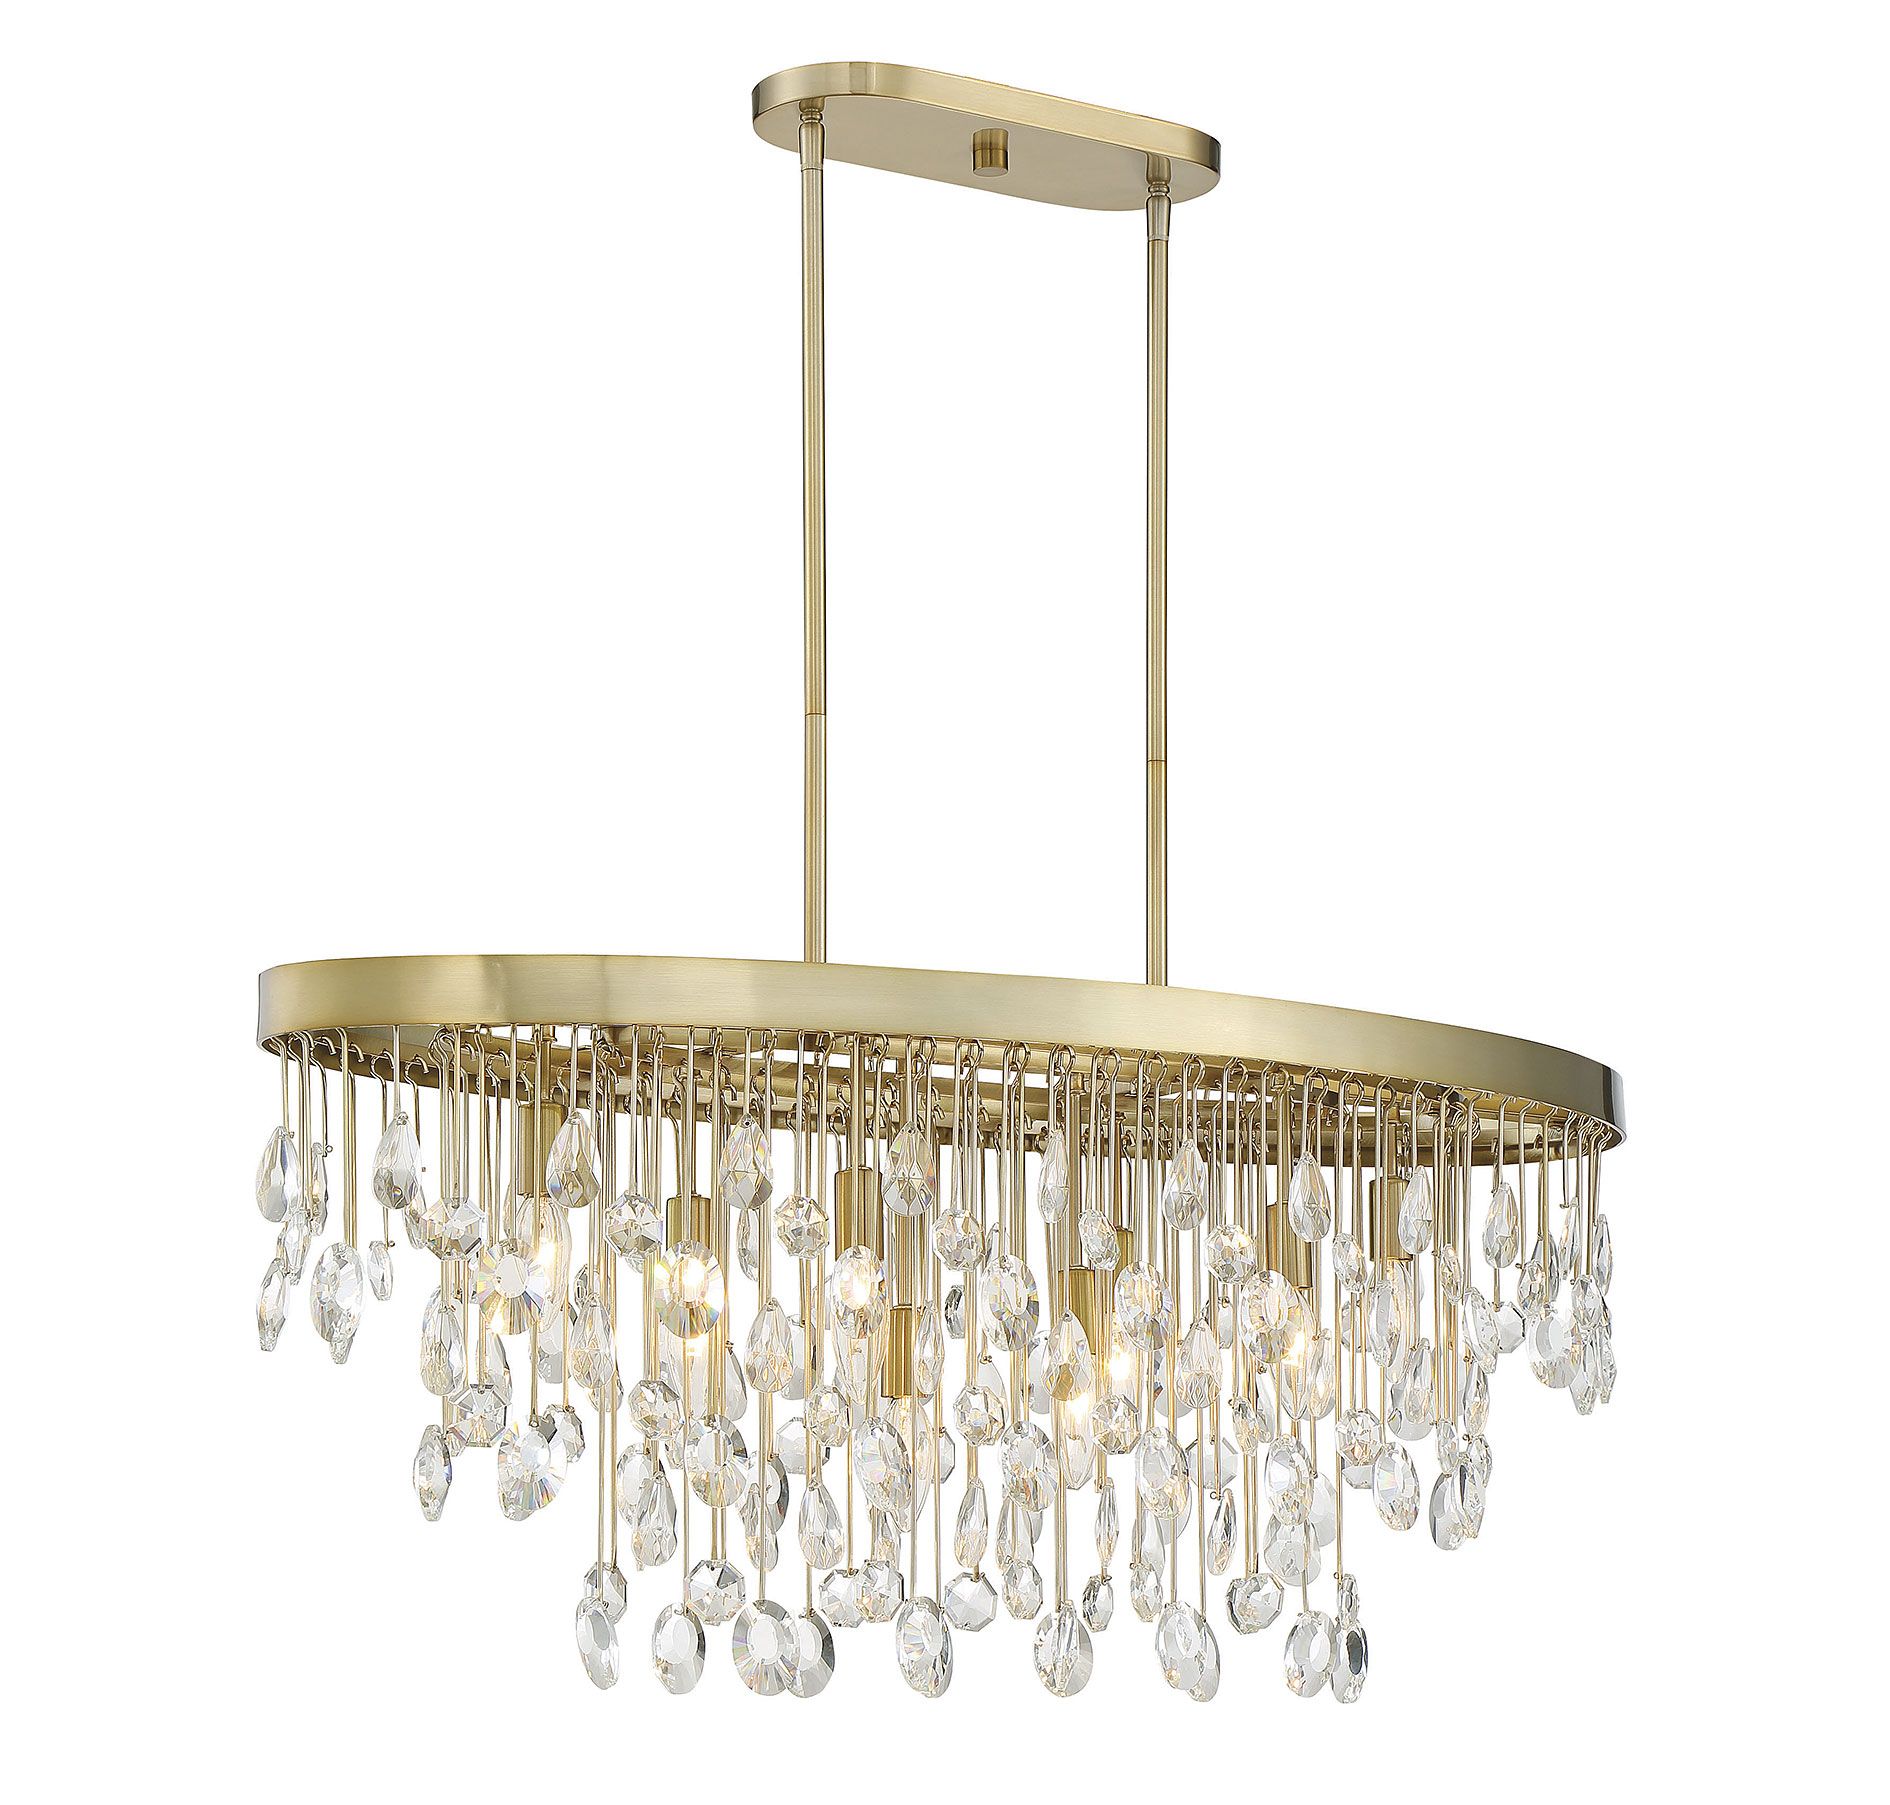 Savoy House Livorno 8-Light Linear Chandelier in Noble Brass 1-1847-8-127 Linear Suspension Light Savoy House   